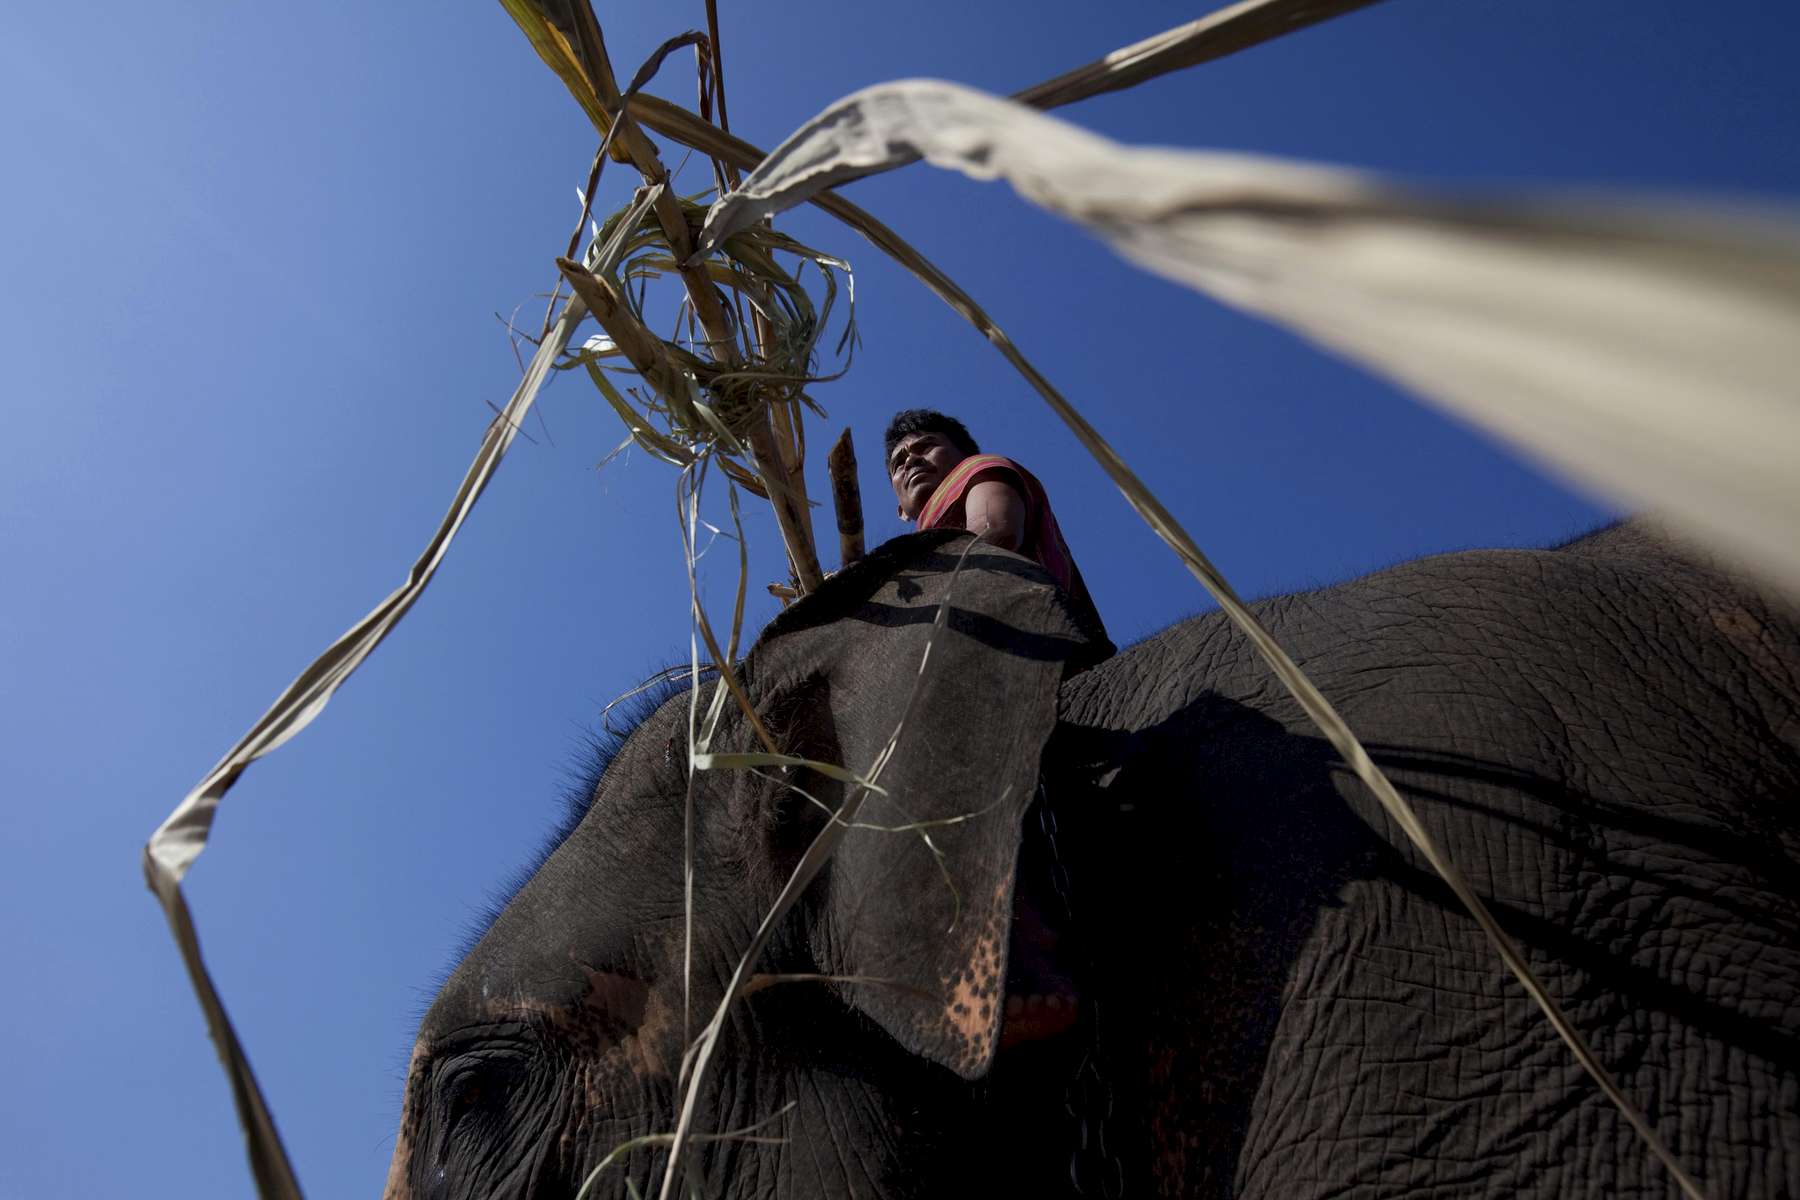 A mahout carries food for his elephant backstage during the Surin Elephant Roundup.